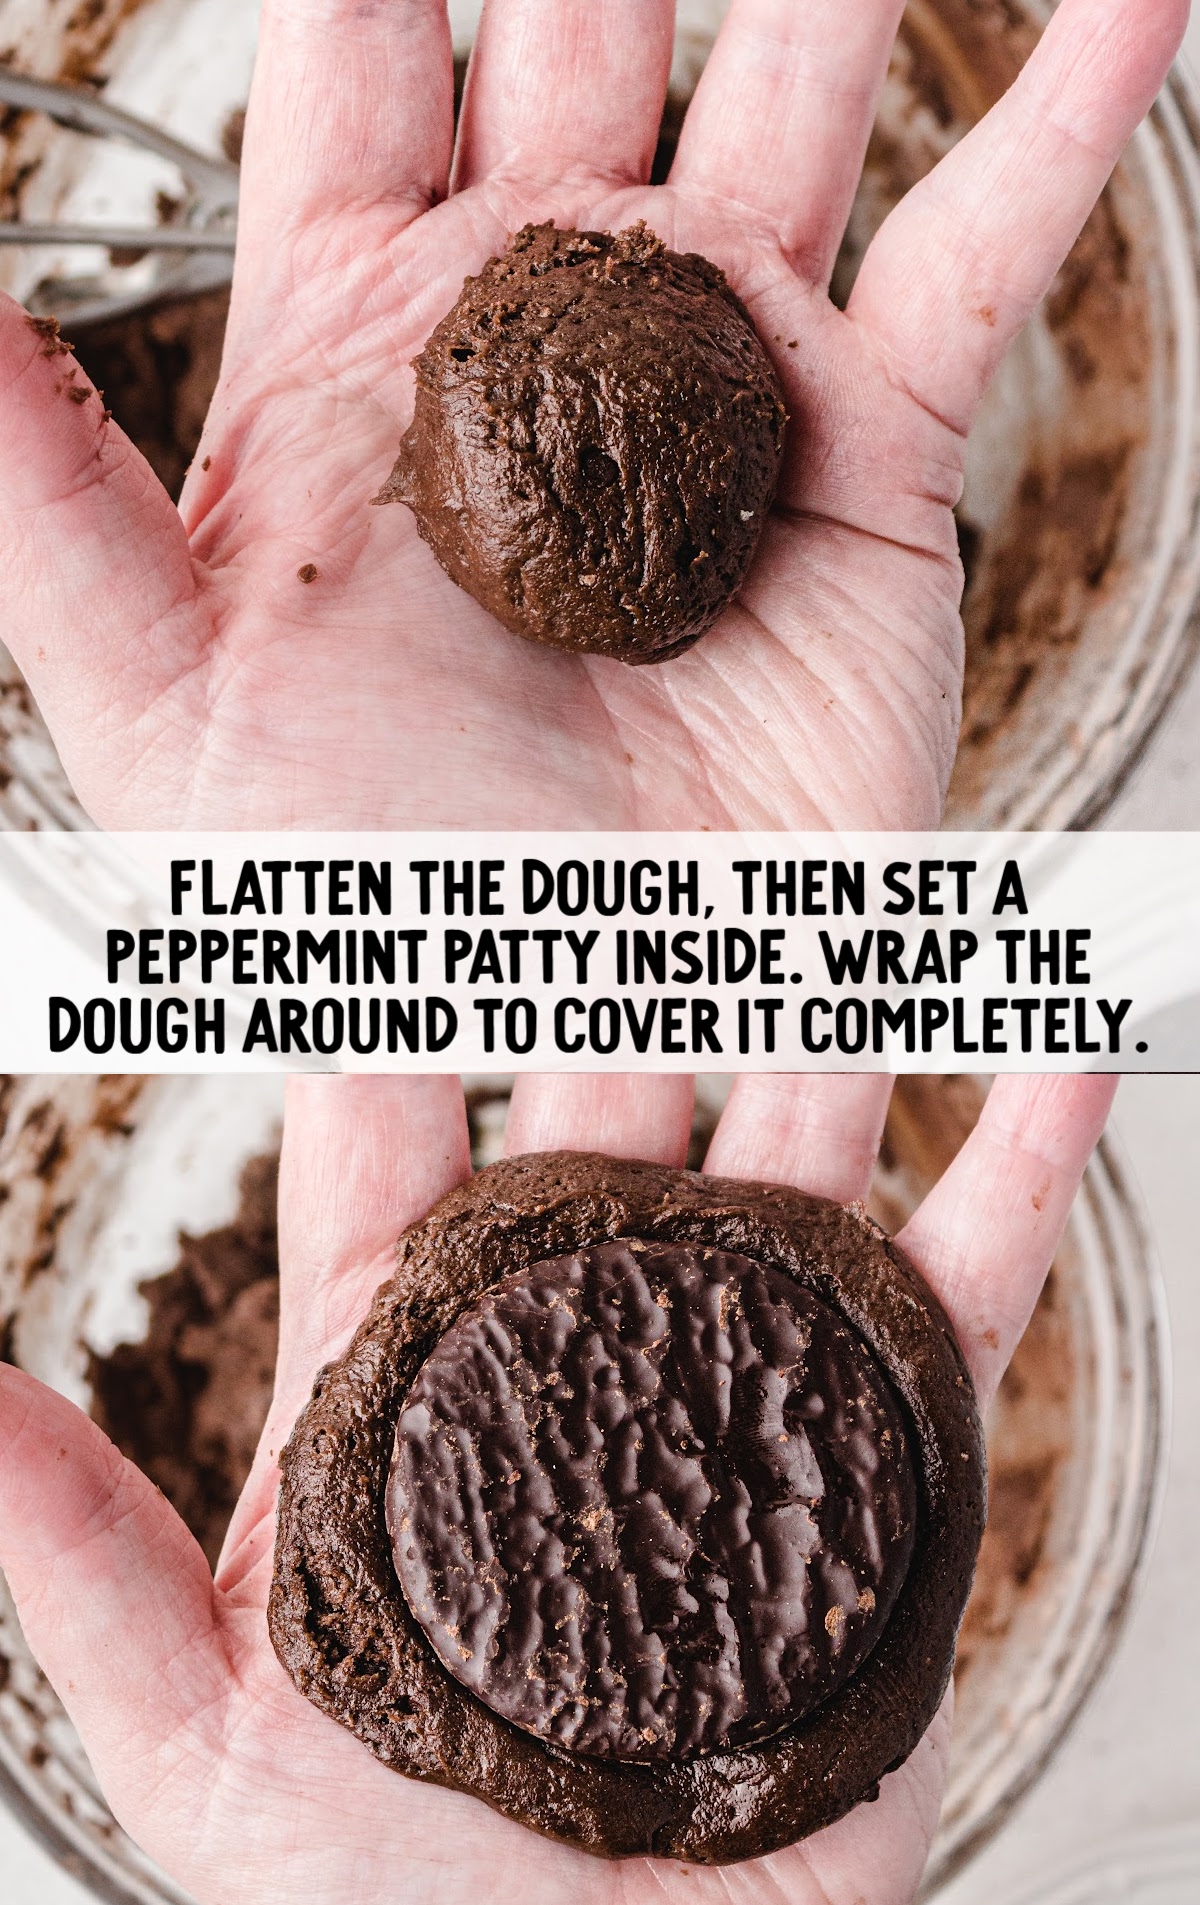 dough flattened and topped with a peppermint patty